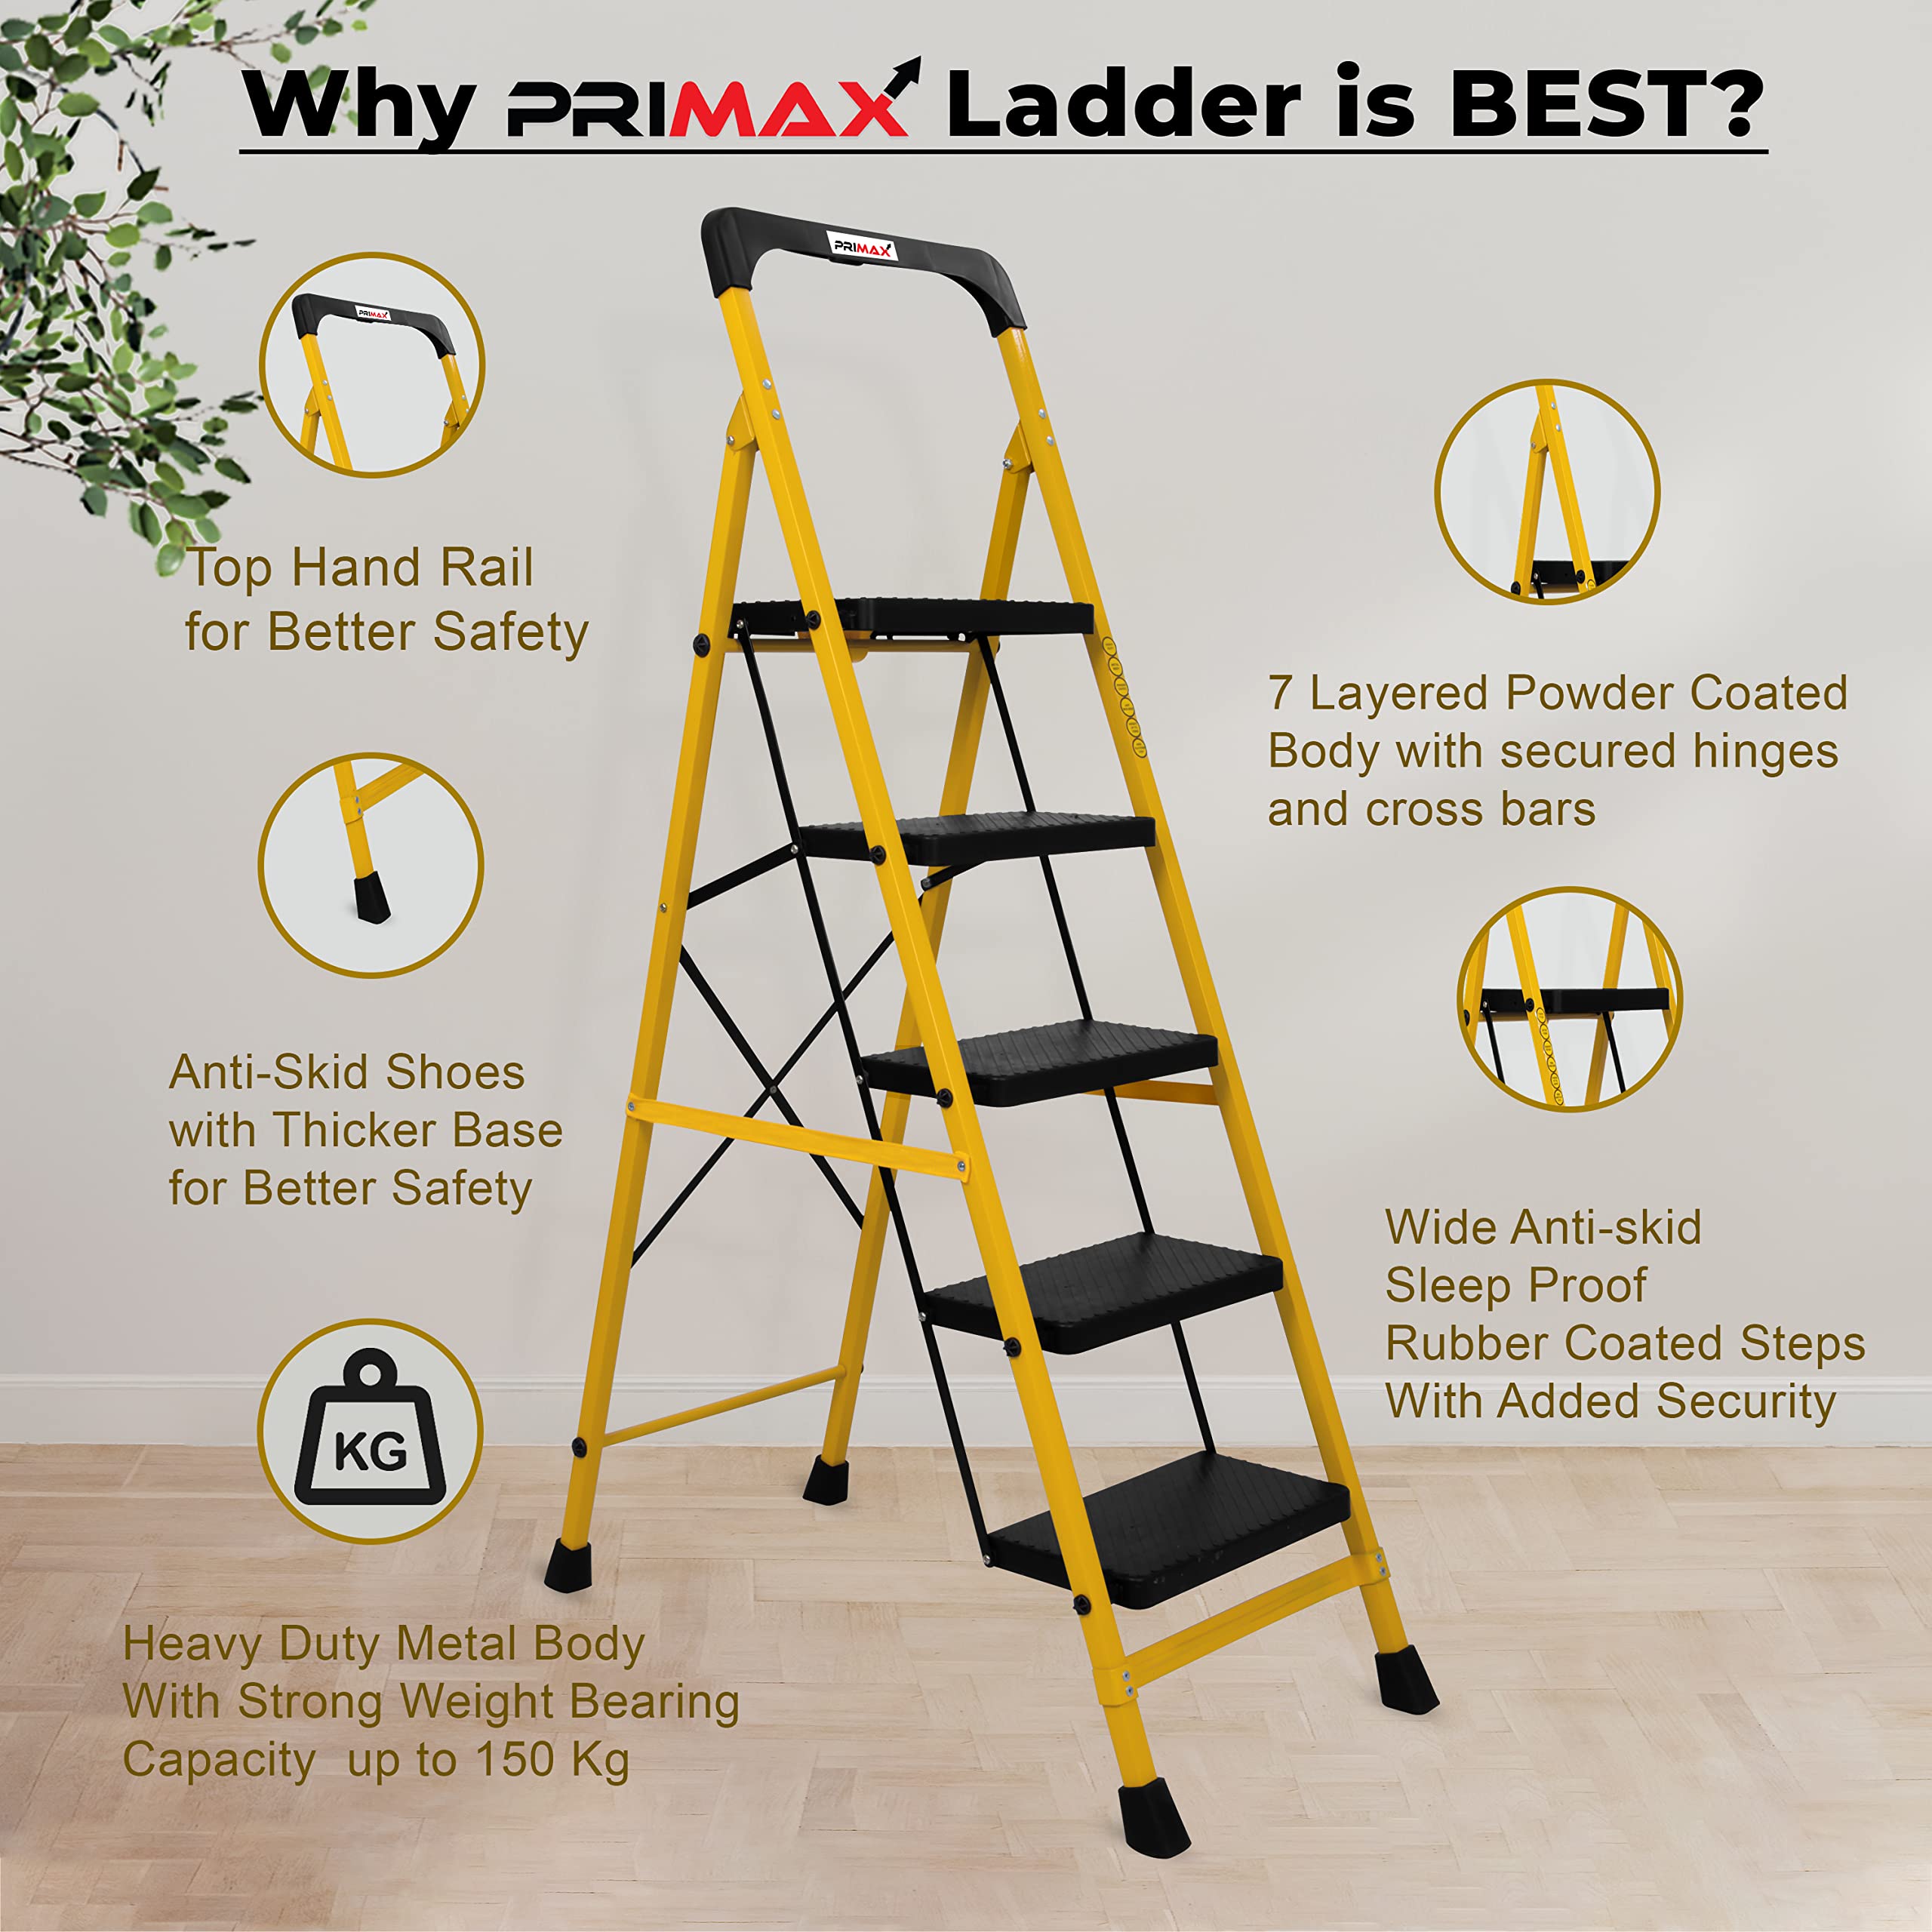 Primax Heavy-Duty GI-Steel Ladder Safety-Clutch Lock and Tool Tray/Step Ladder for Home - 5 Step (Squaro-Black&Yellow)